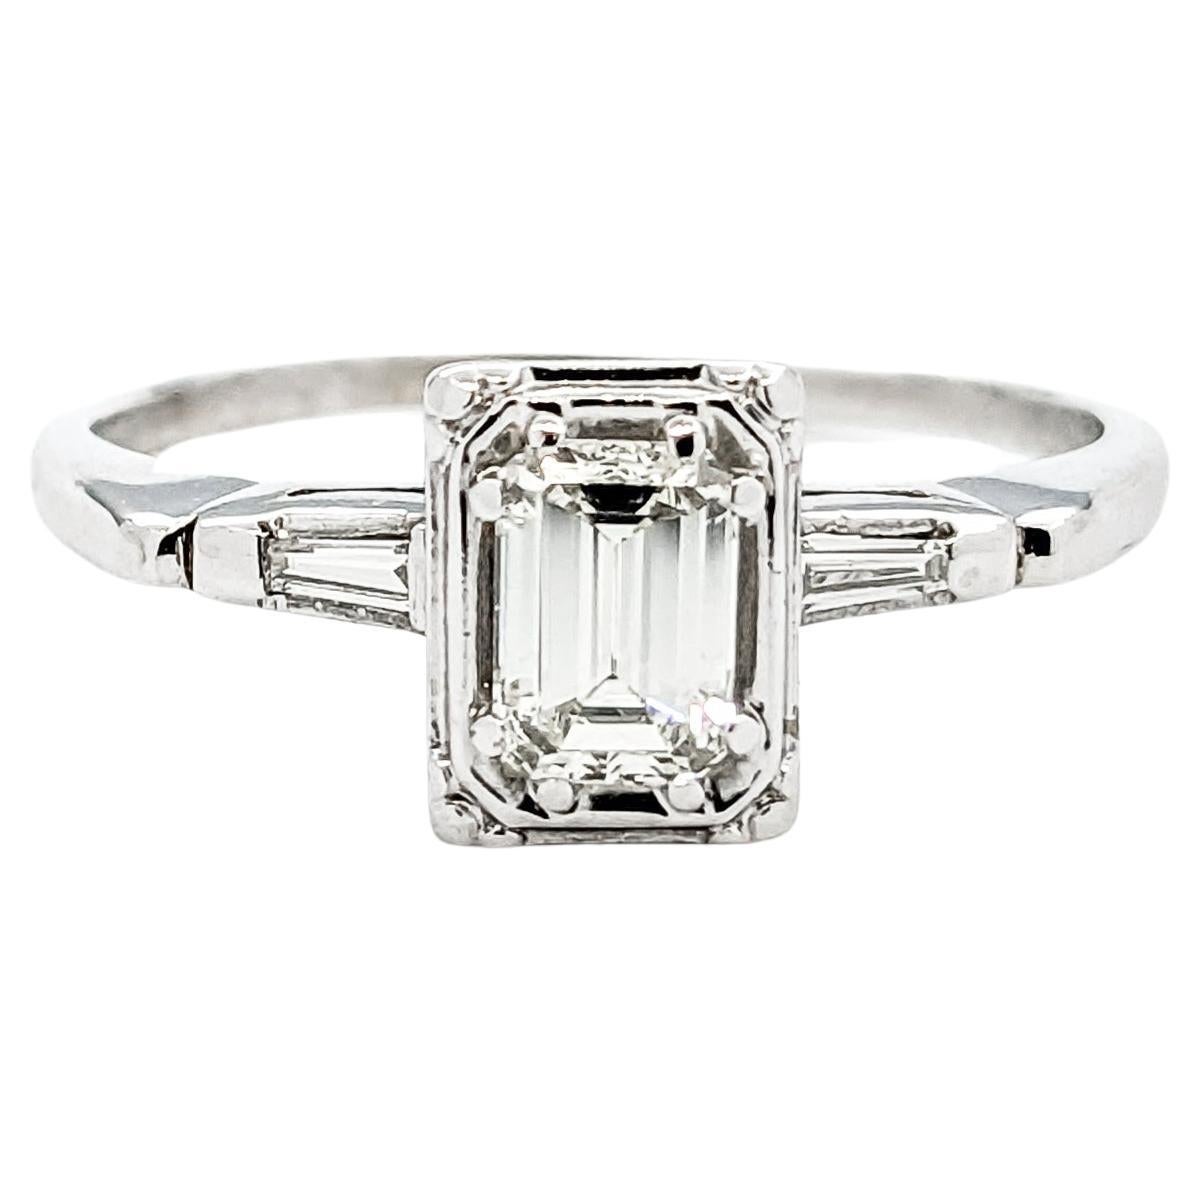 Vintage .46ct Emerald Cut Diamond Engagement Ring In White Gold